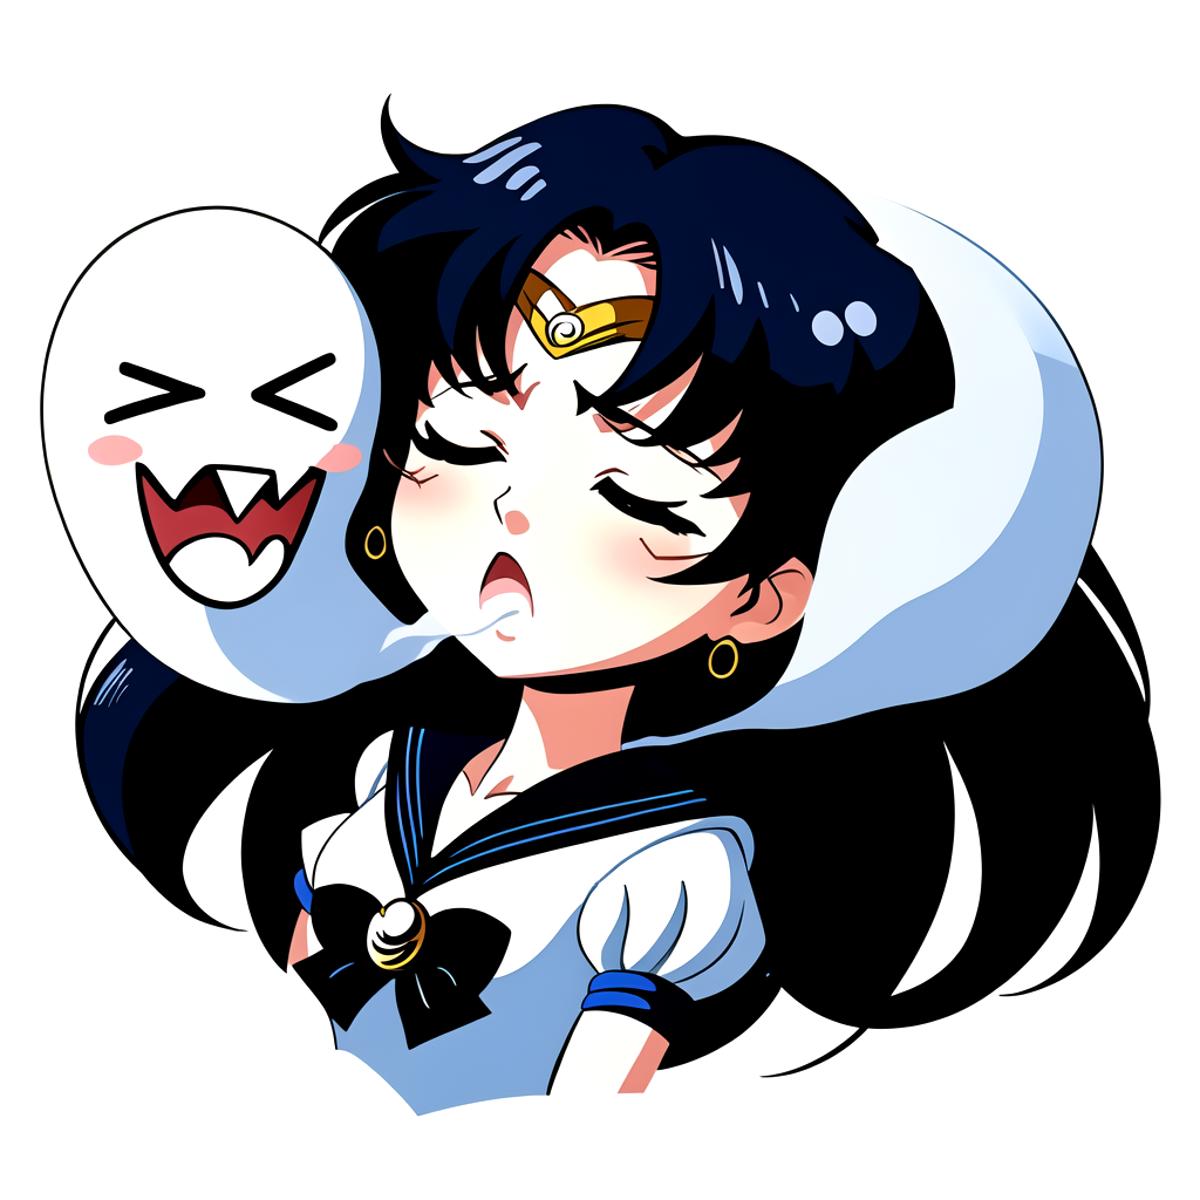 Anime Soul Leaving expression | Emotes image by PANyZHAL